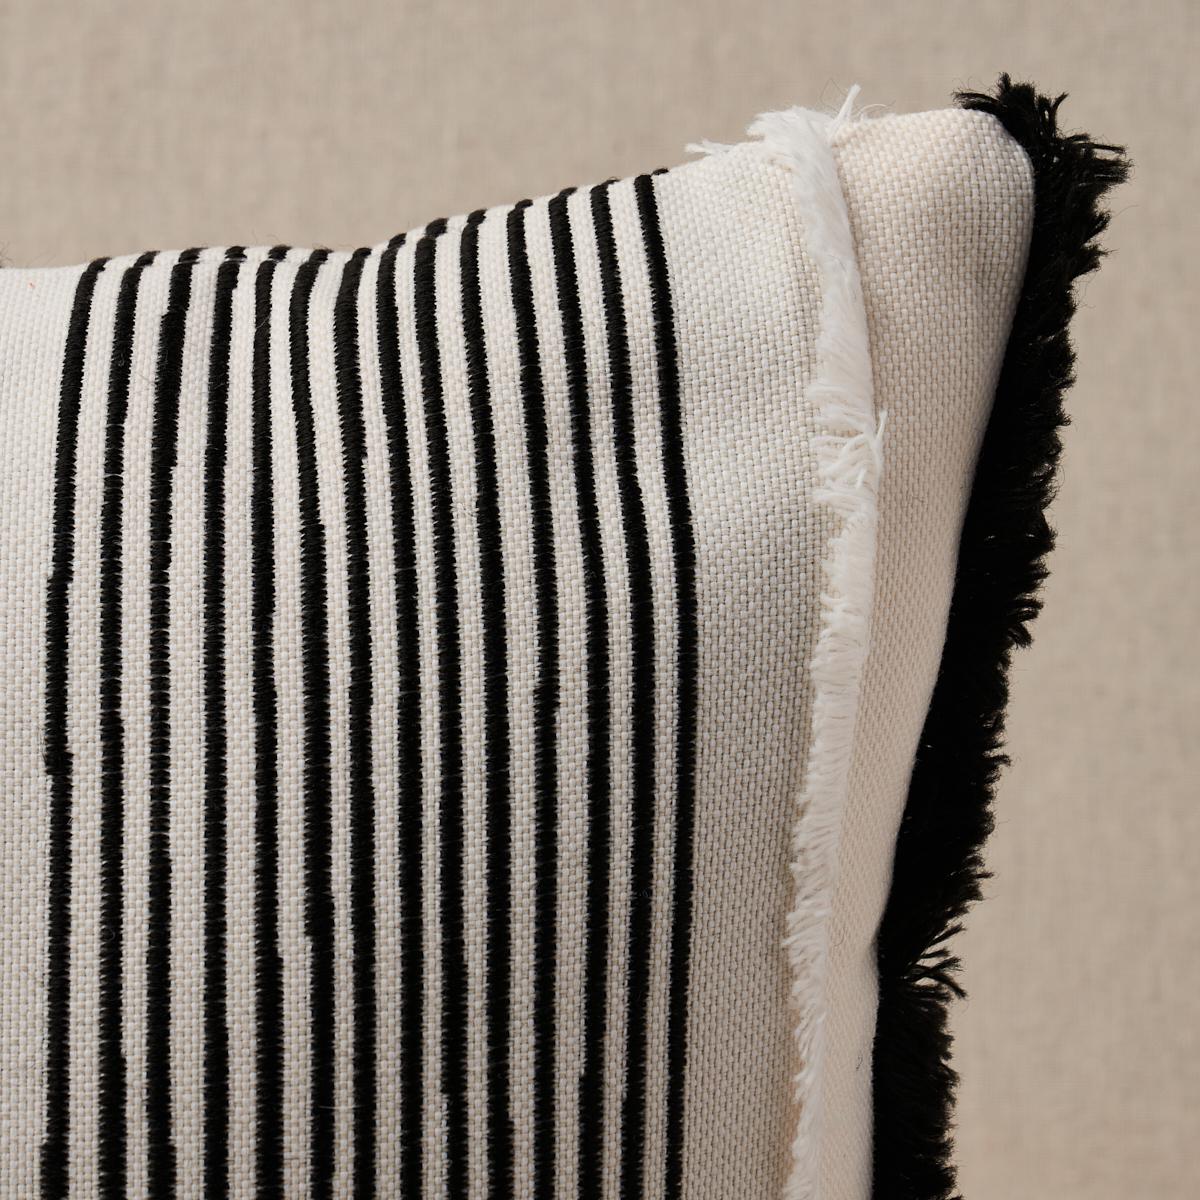 This pillow features Billy Indoor/Outdoor with a knife edge finish. A stunning combination of cut fringe and skinny pencil stripes, Billy Indoor/Outdoor in black is an elegant textural tonal stripe with a remarkably soft drape and luxurious hand.